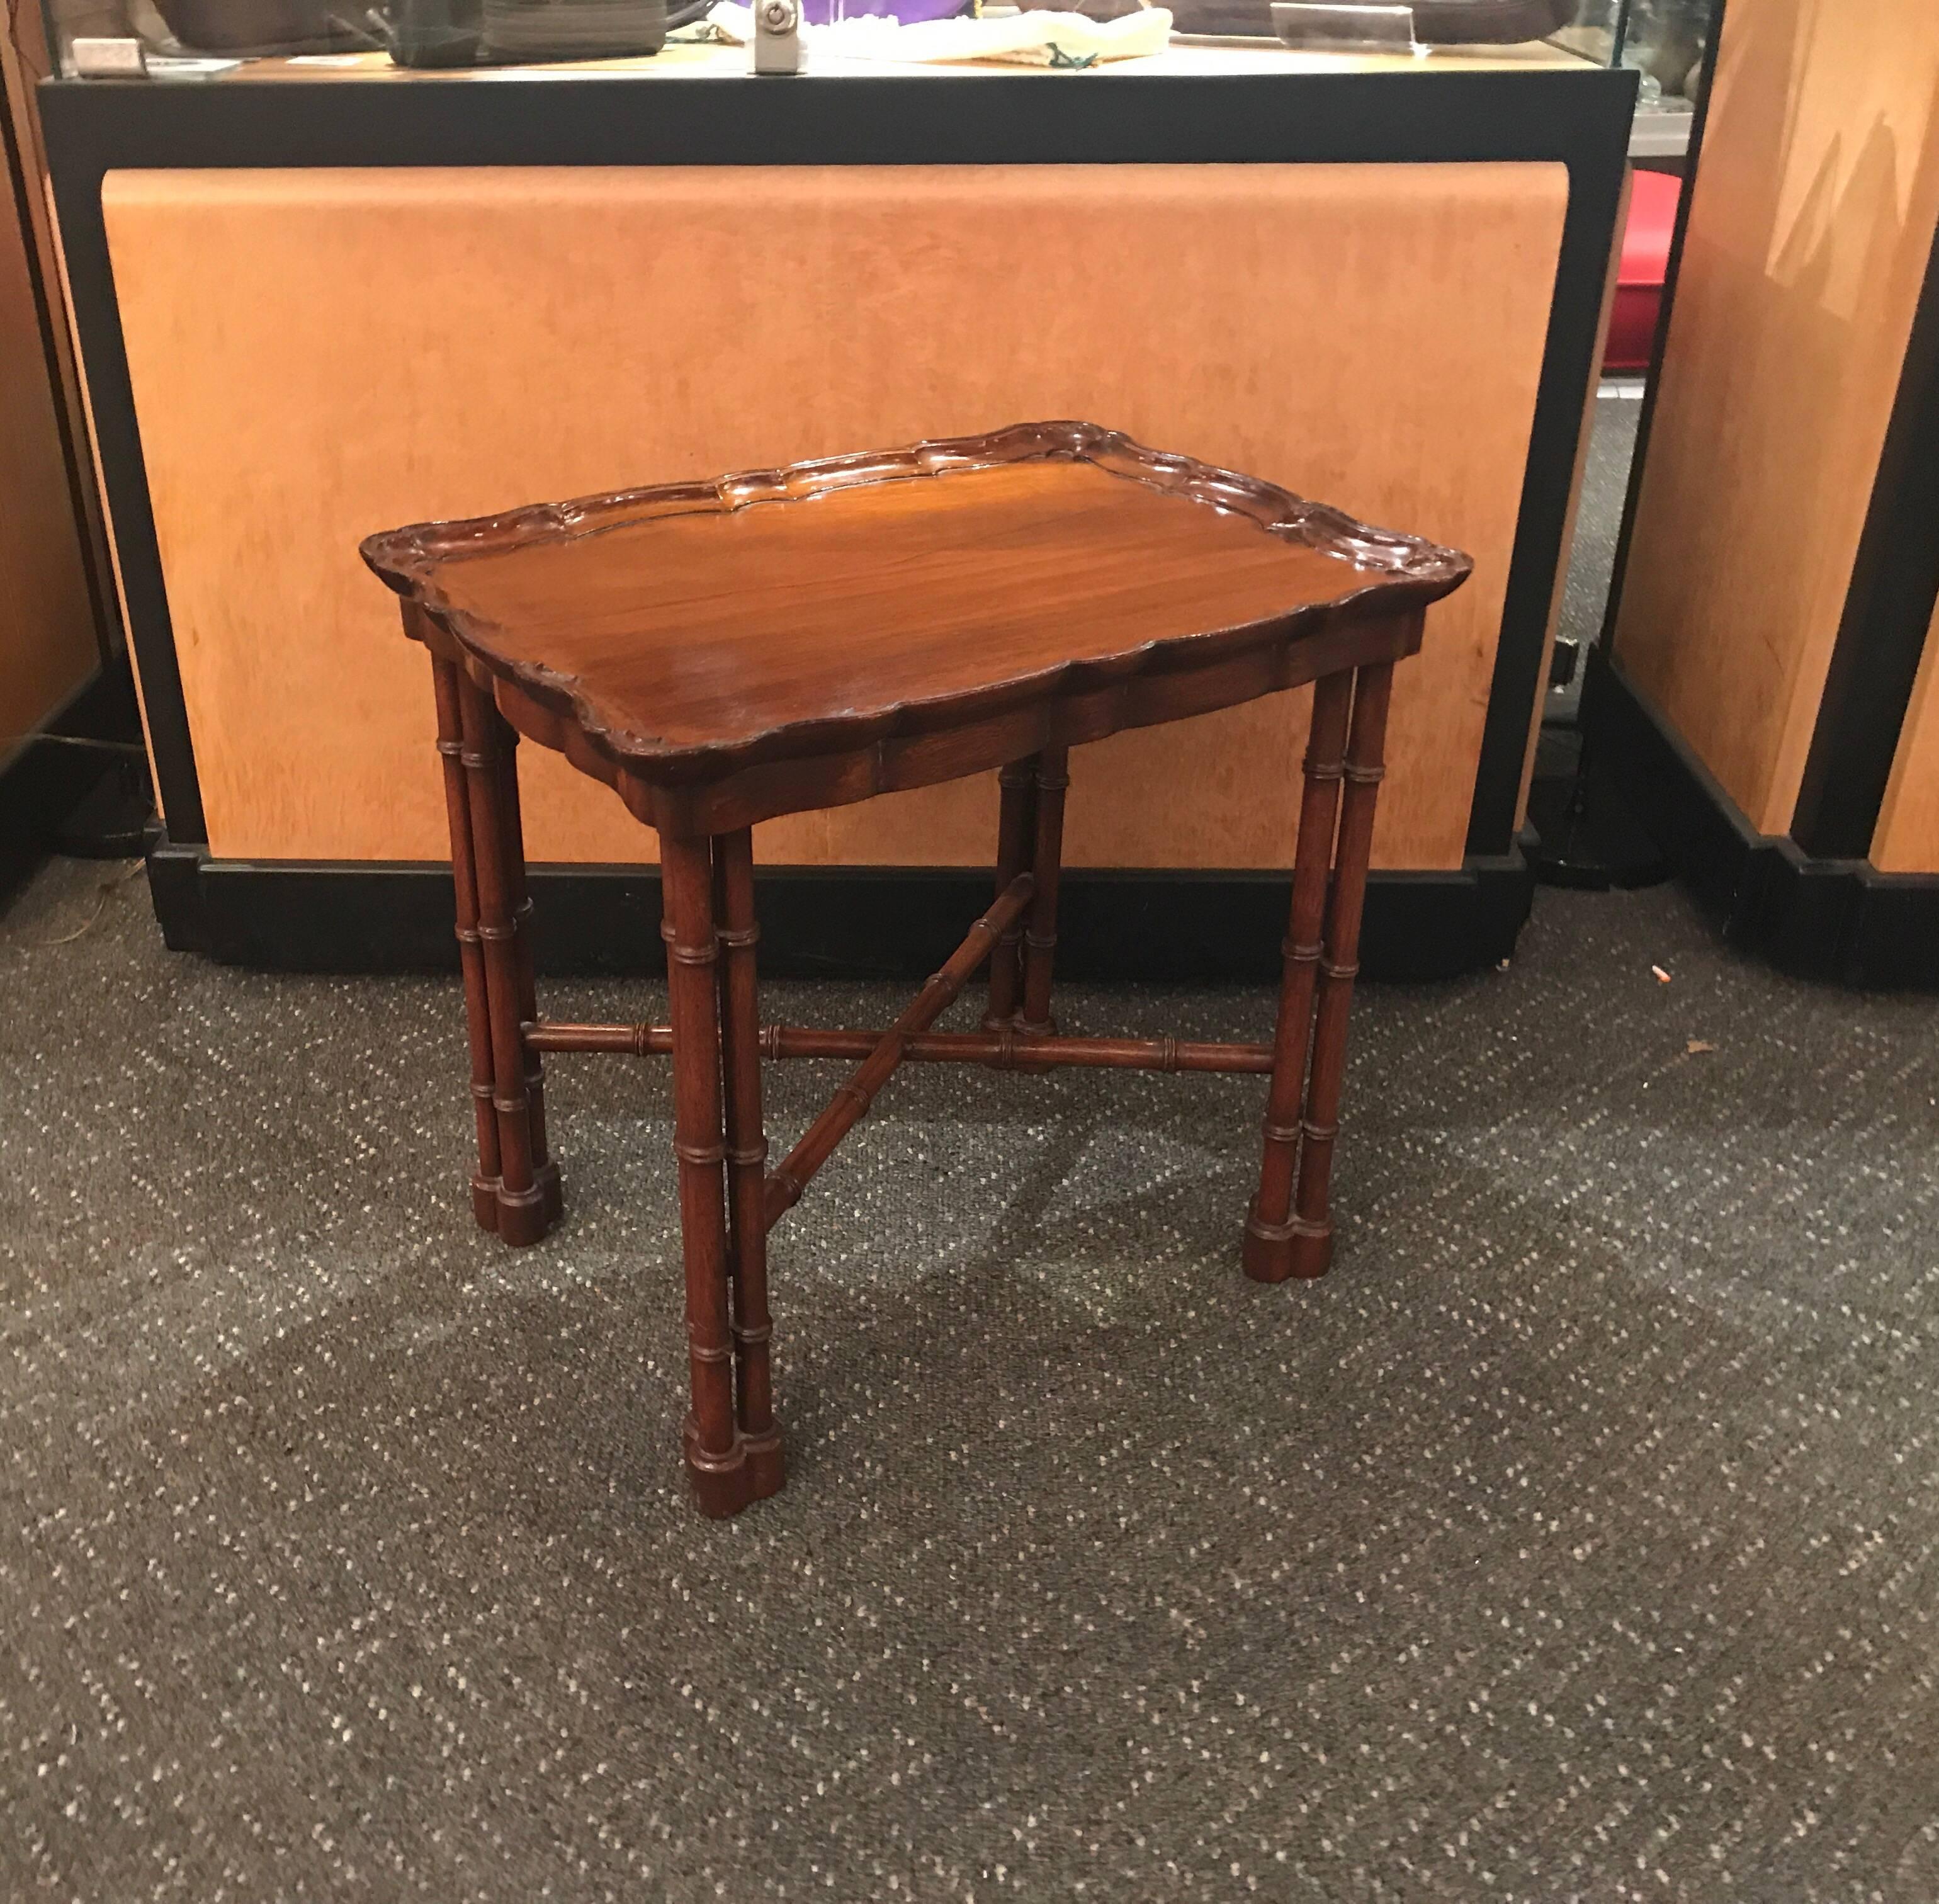 Elegant solid mahogany hand carved drinks table. The Regency base topped with a well carved piecrust edge. The top is carved from a solid piece of wood. Well made and beautiful. The top is attached.